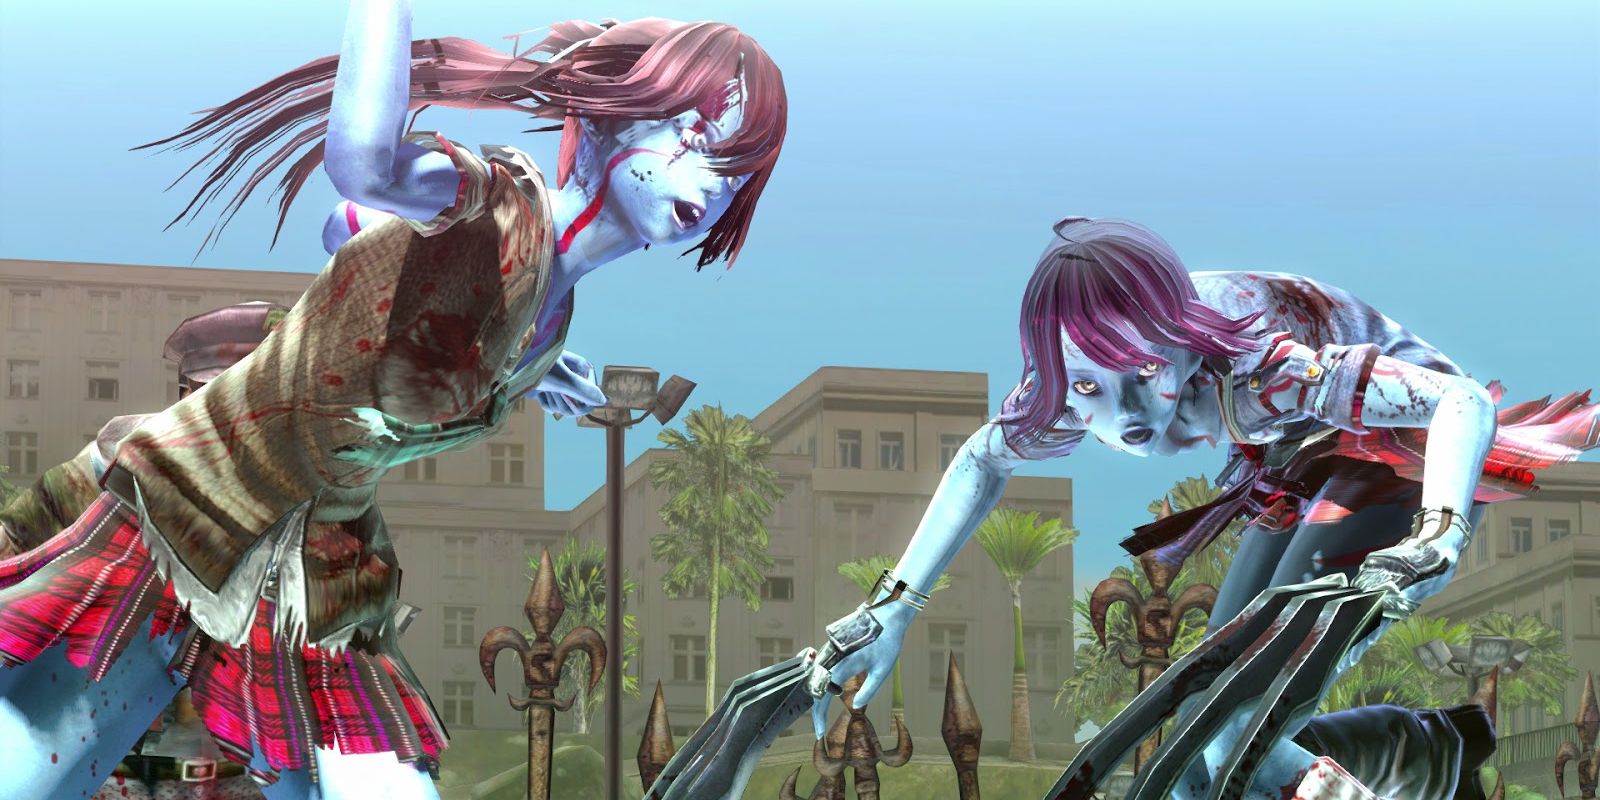 The Zombie Sisters attack with weapons in Onechanbara